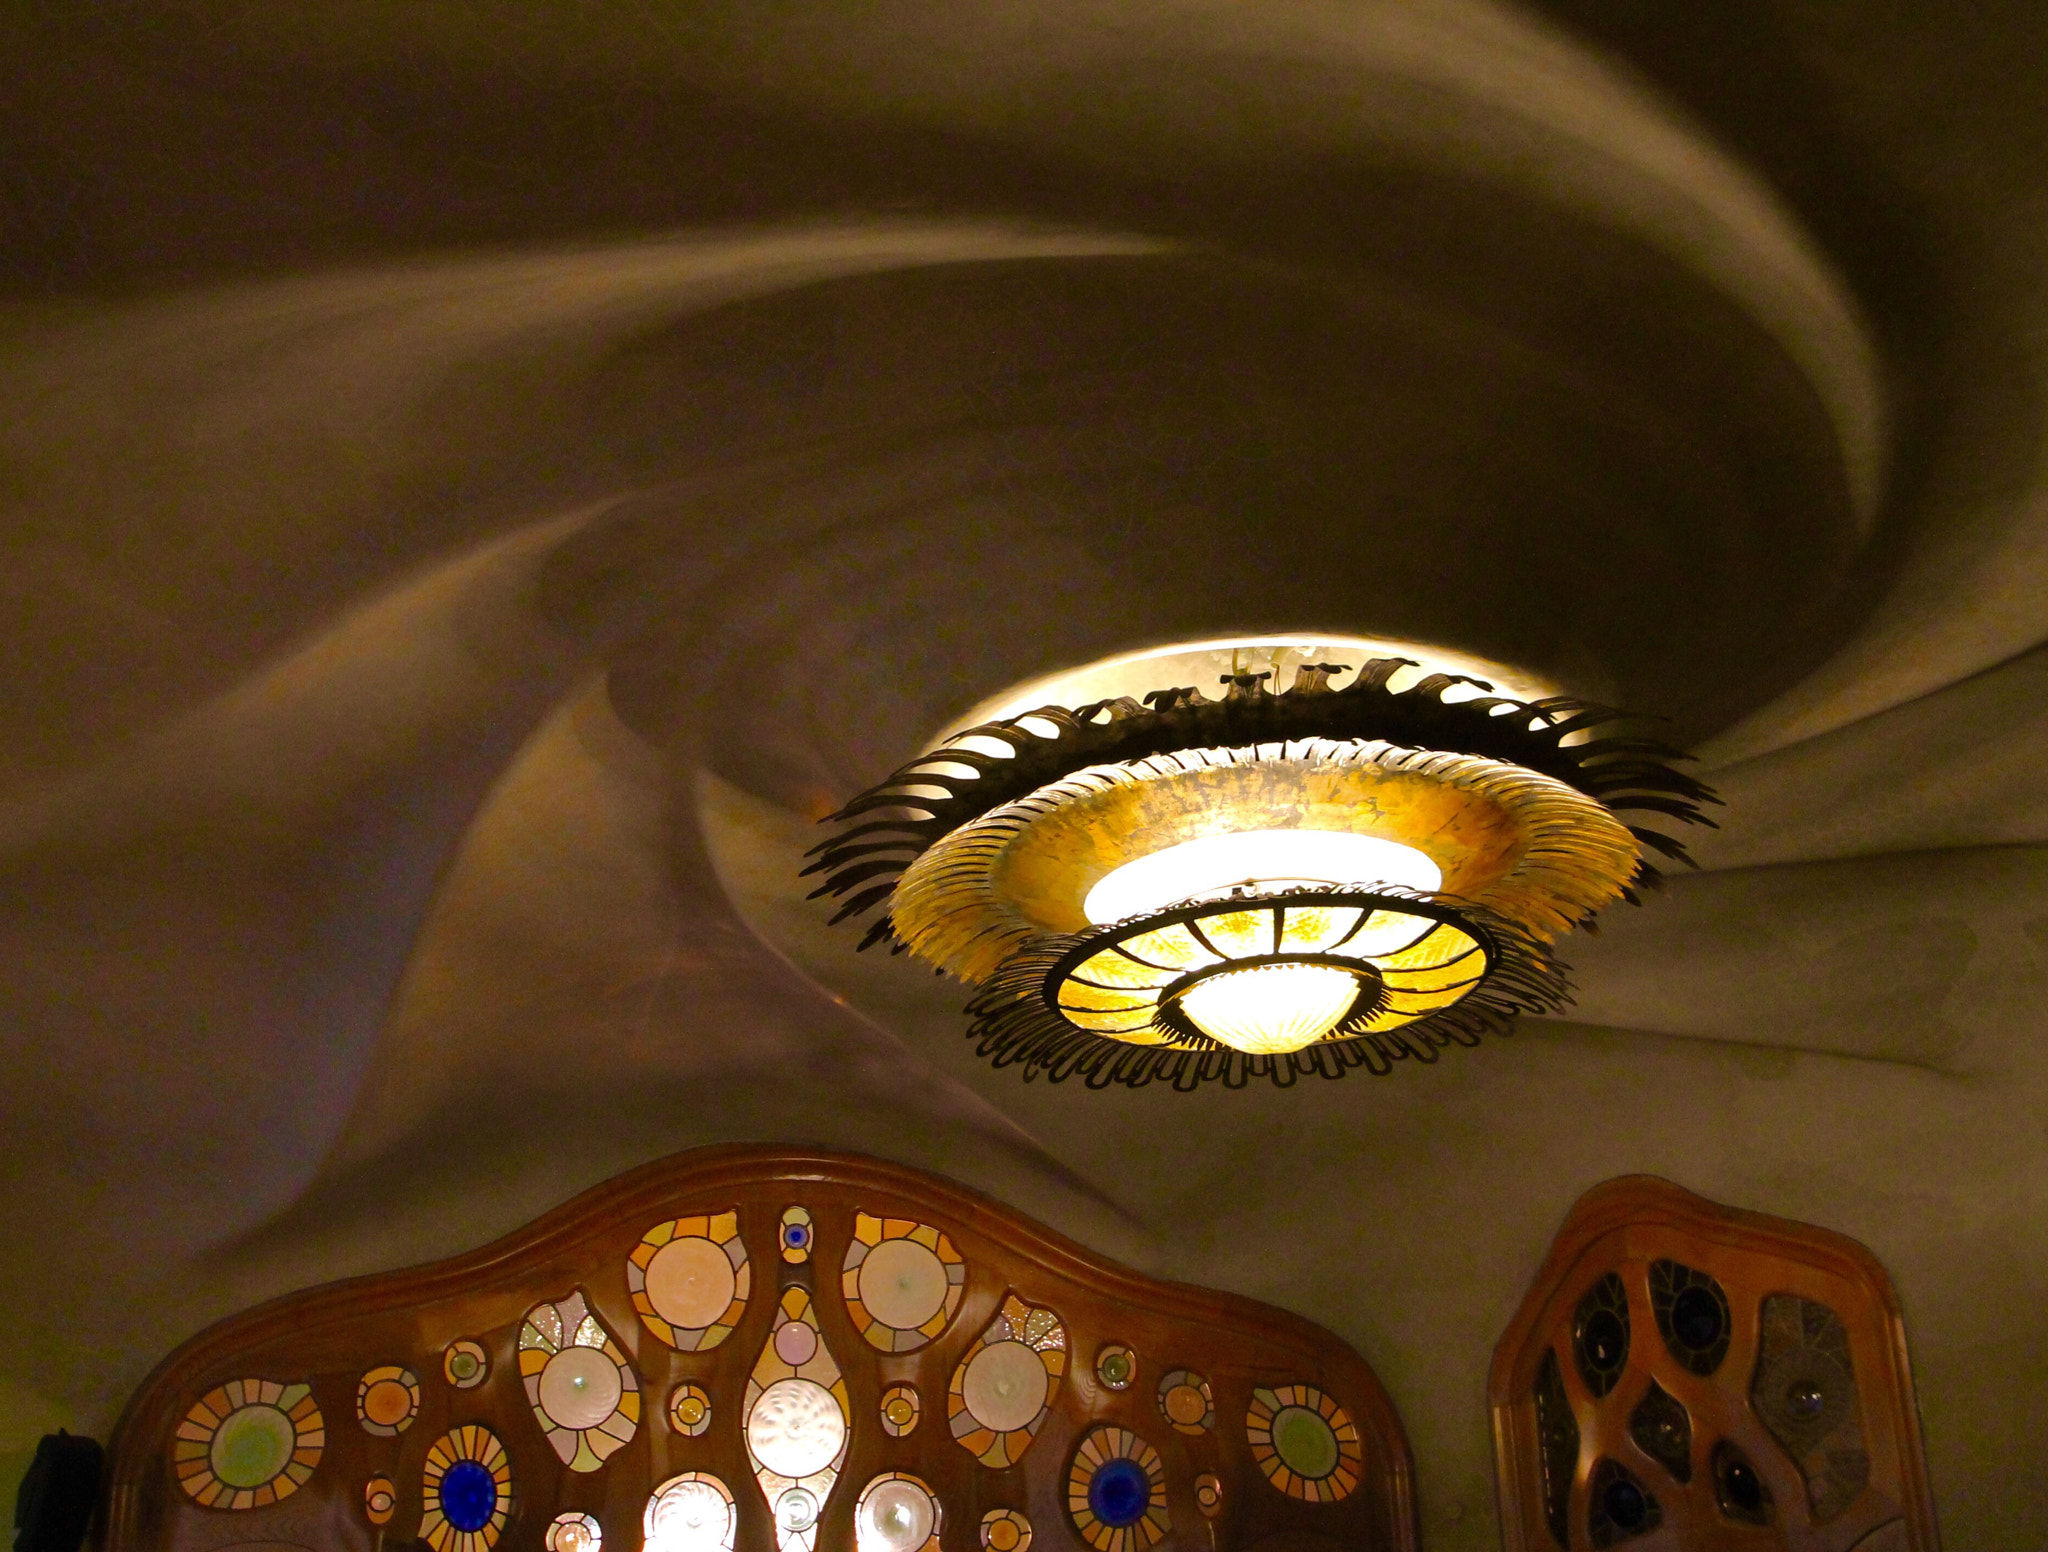 Canon 10-24mm sample photo. Roof at casa batlló by gaudì with impressive sea-like turmoil lamp photography